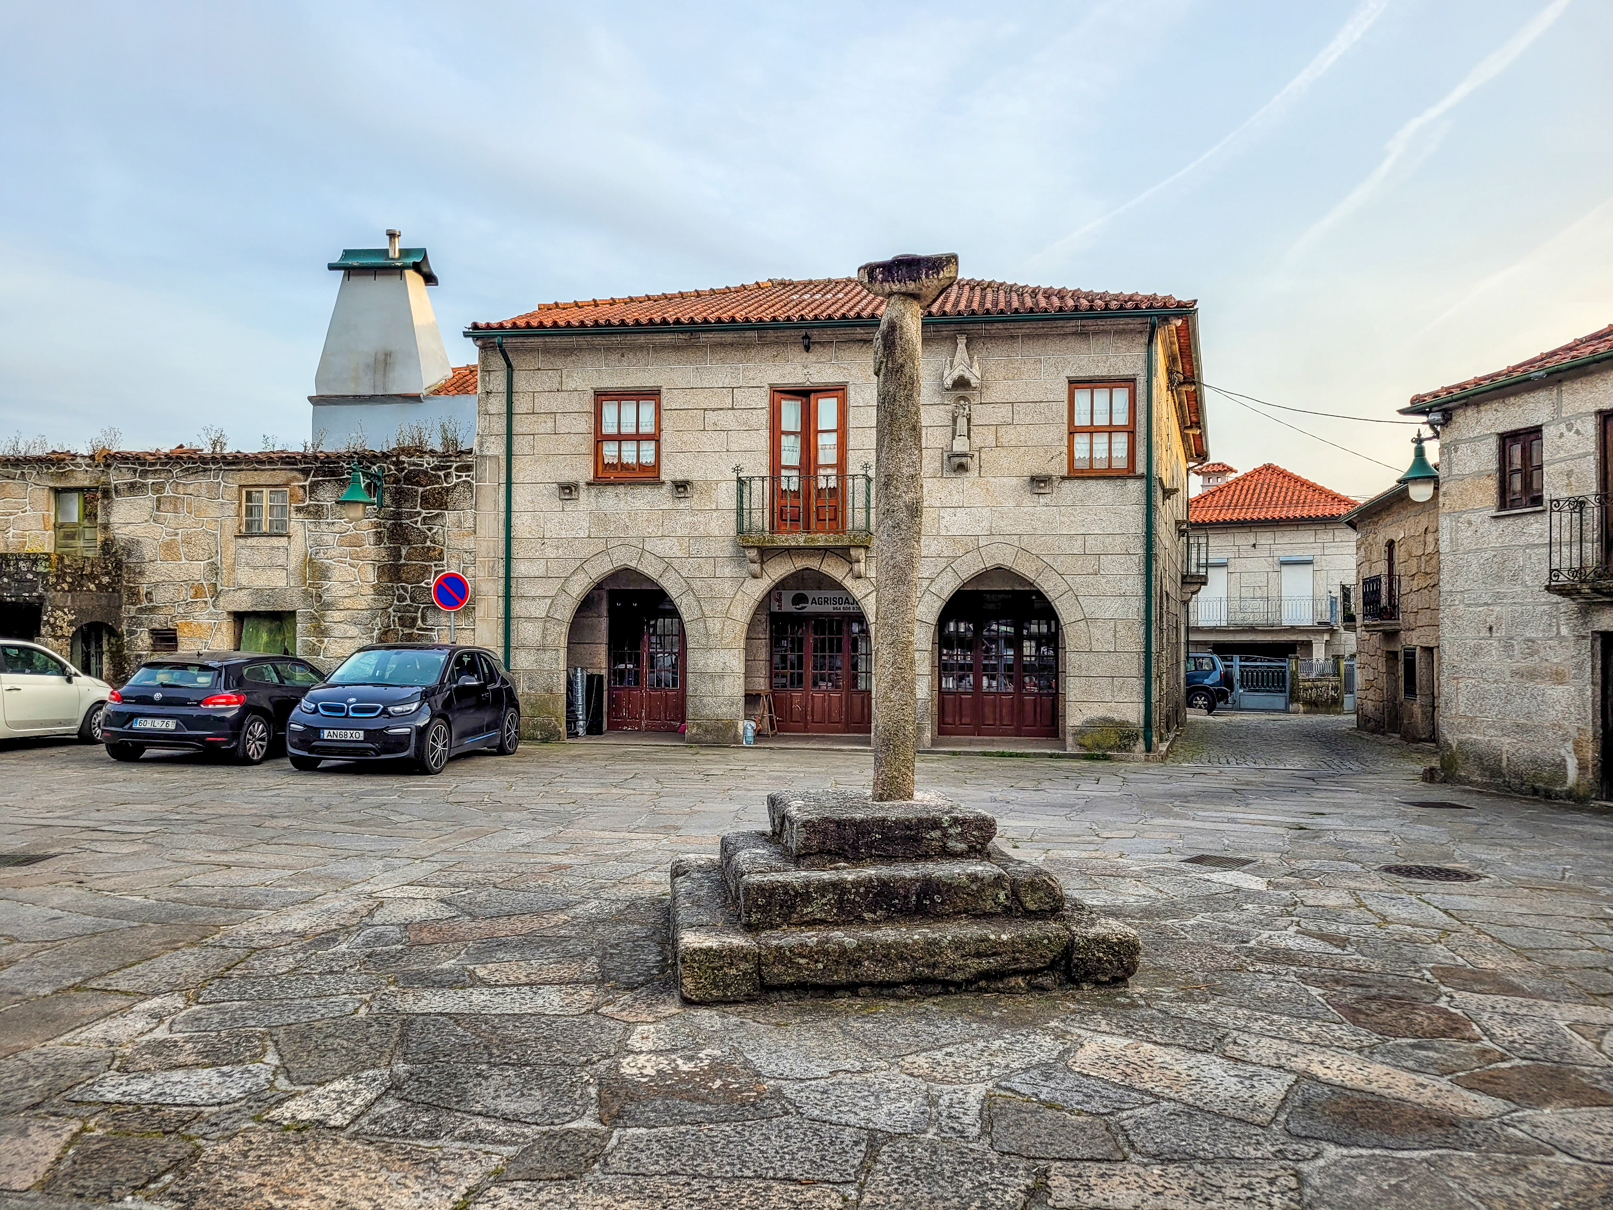 Eiró Square and Pillory of Soajo